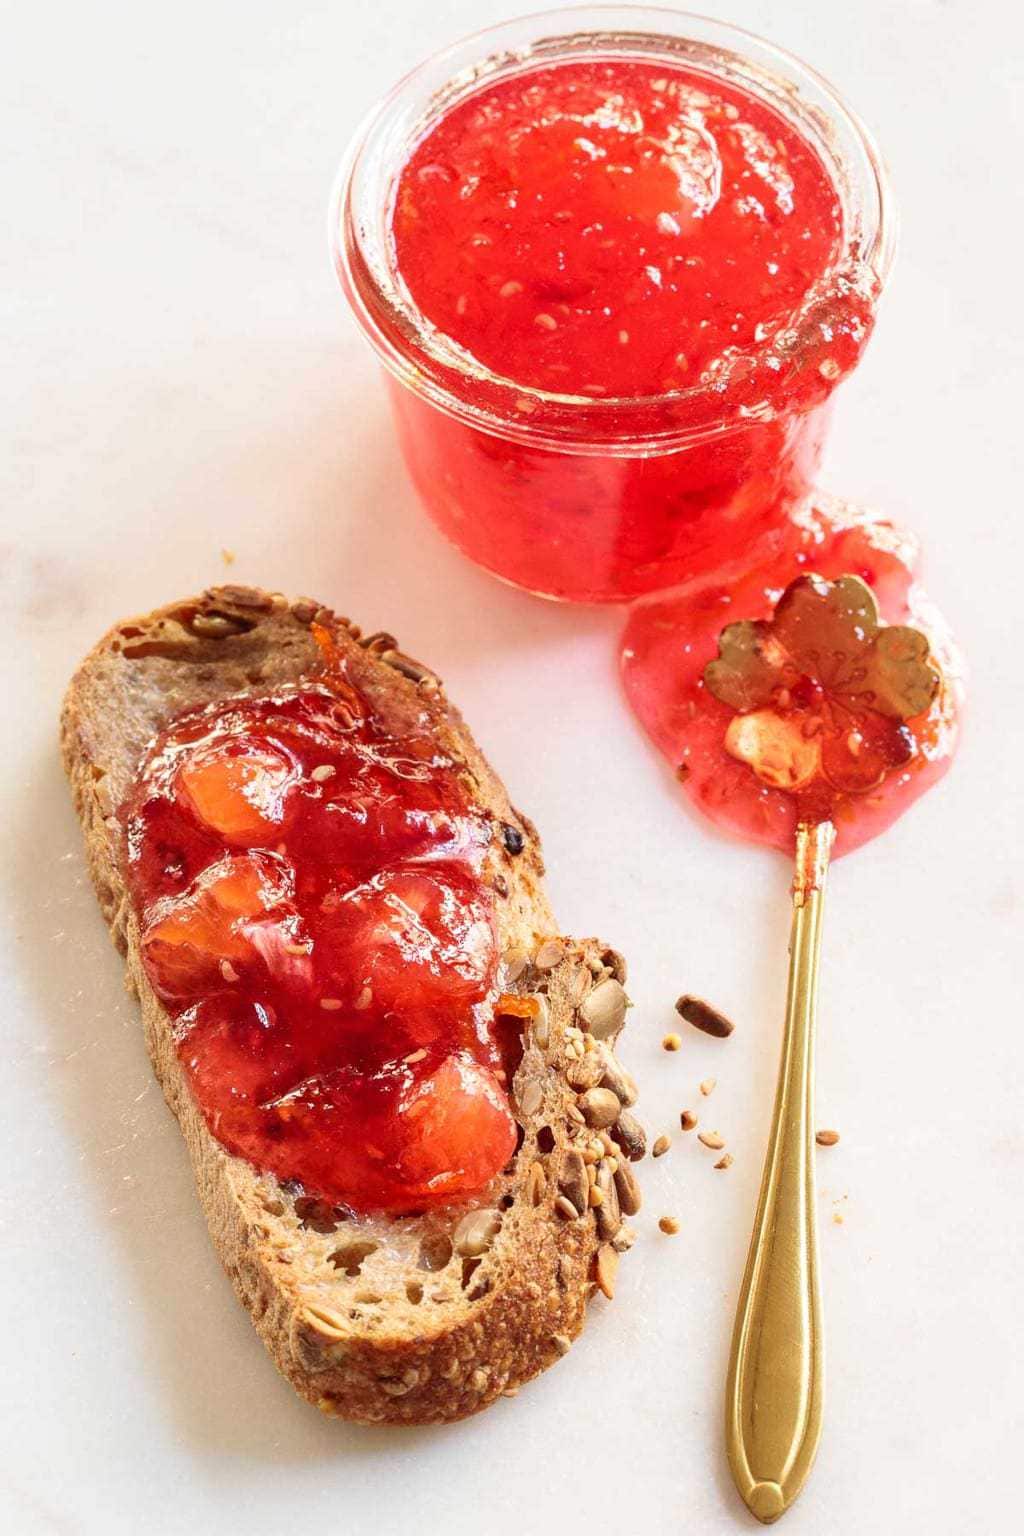 Overhead photo of Raspberry Meyer Lemon Marmalade in a glass canning jar and spread on toast with a small gold spoon.